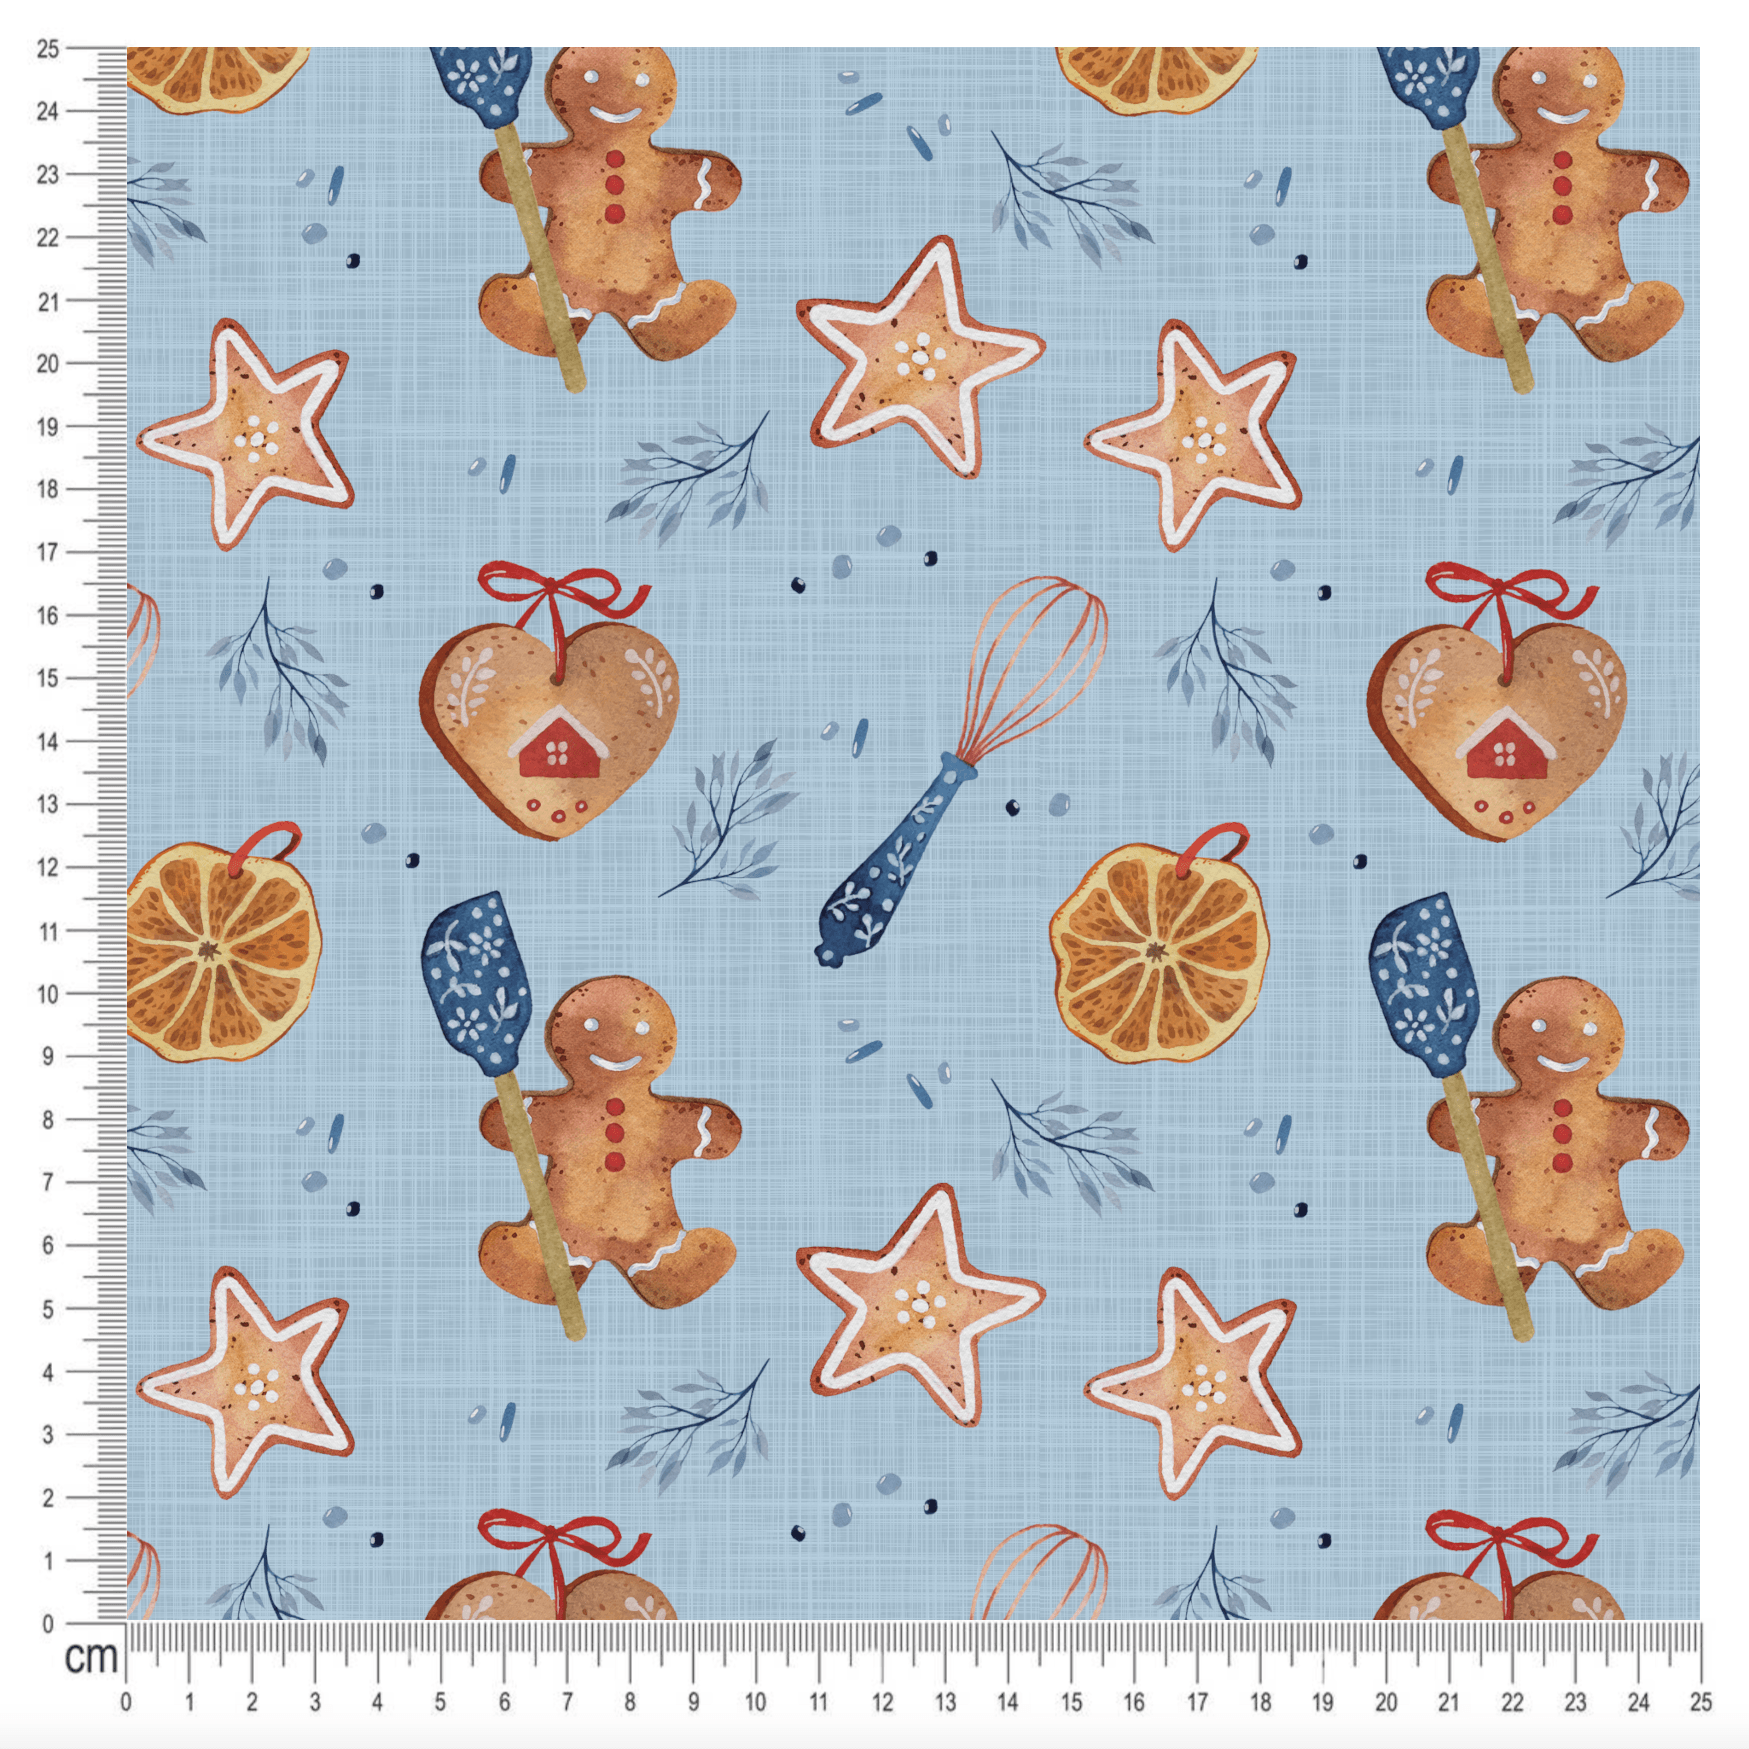 PRE-ORDER!!! - Baking Spirits Bright - Blue Linen (EXCLUSIVE) (due July)-Jersey Fabric-Jelly Fabrics